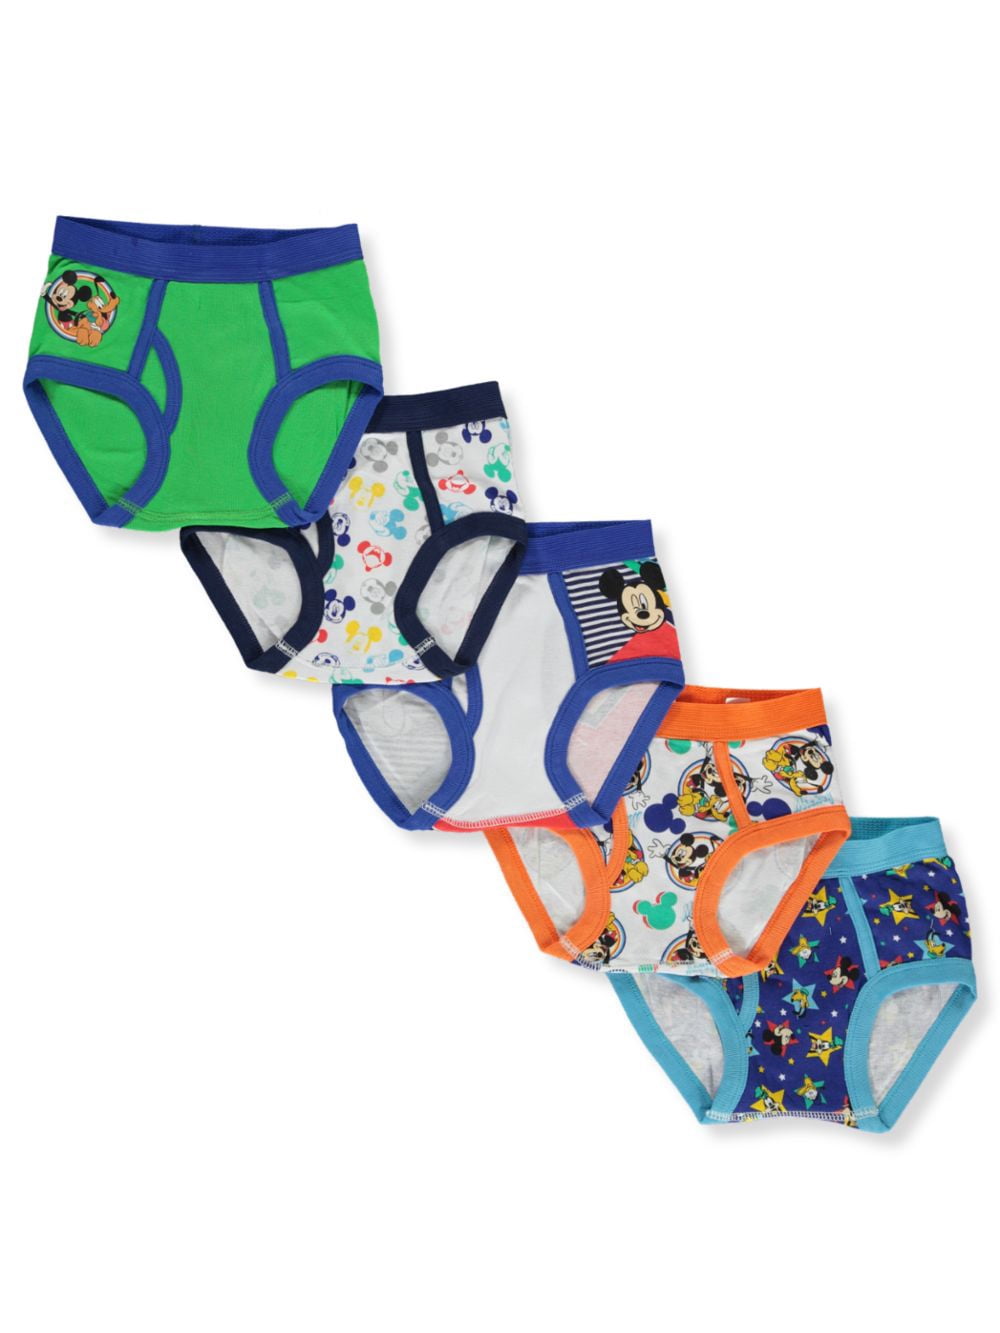 Disney Mickey Mouse Boys' 5-Pack Briefs - white/multi, 2t - 3t (Toddler) 